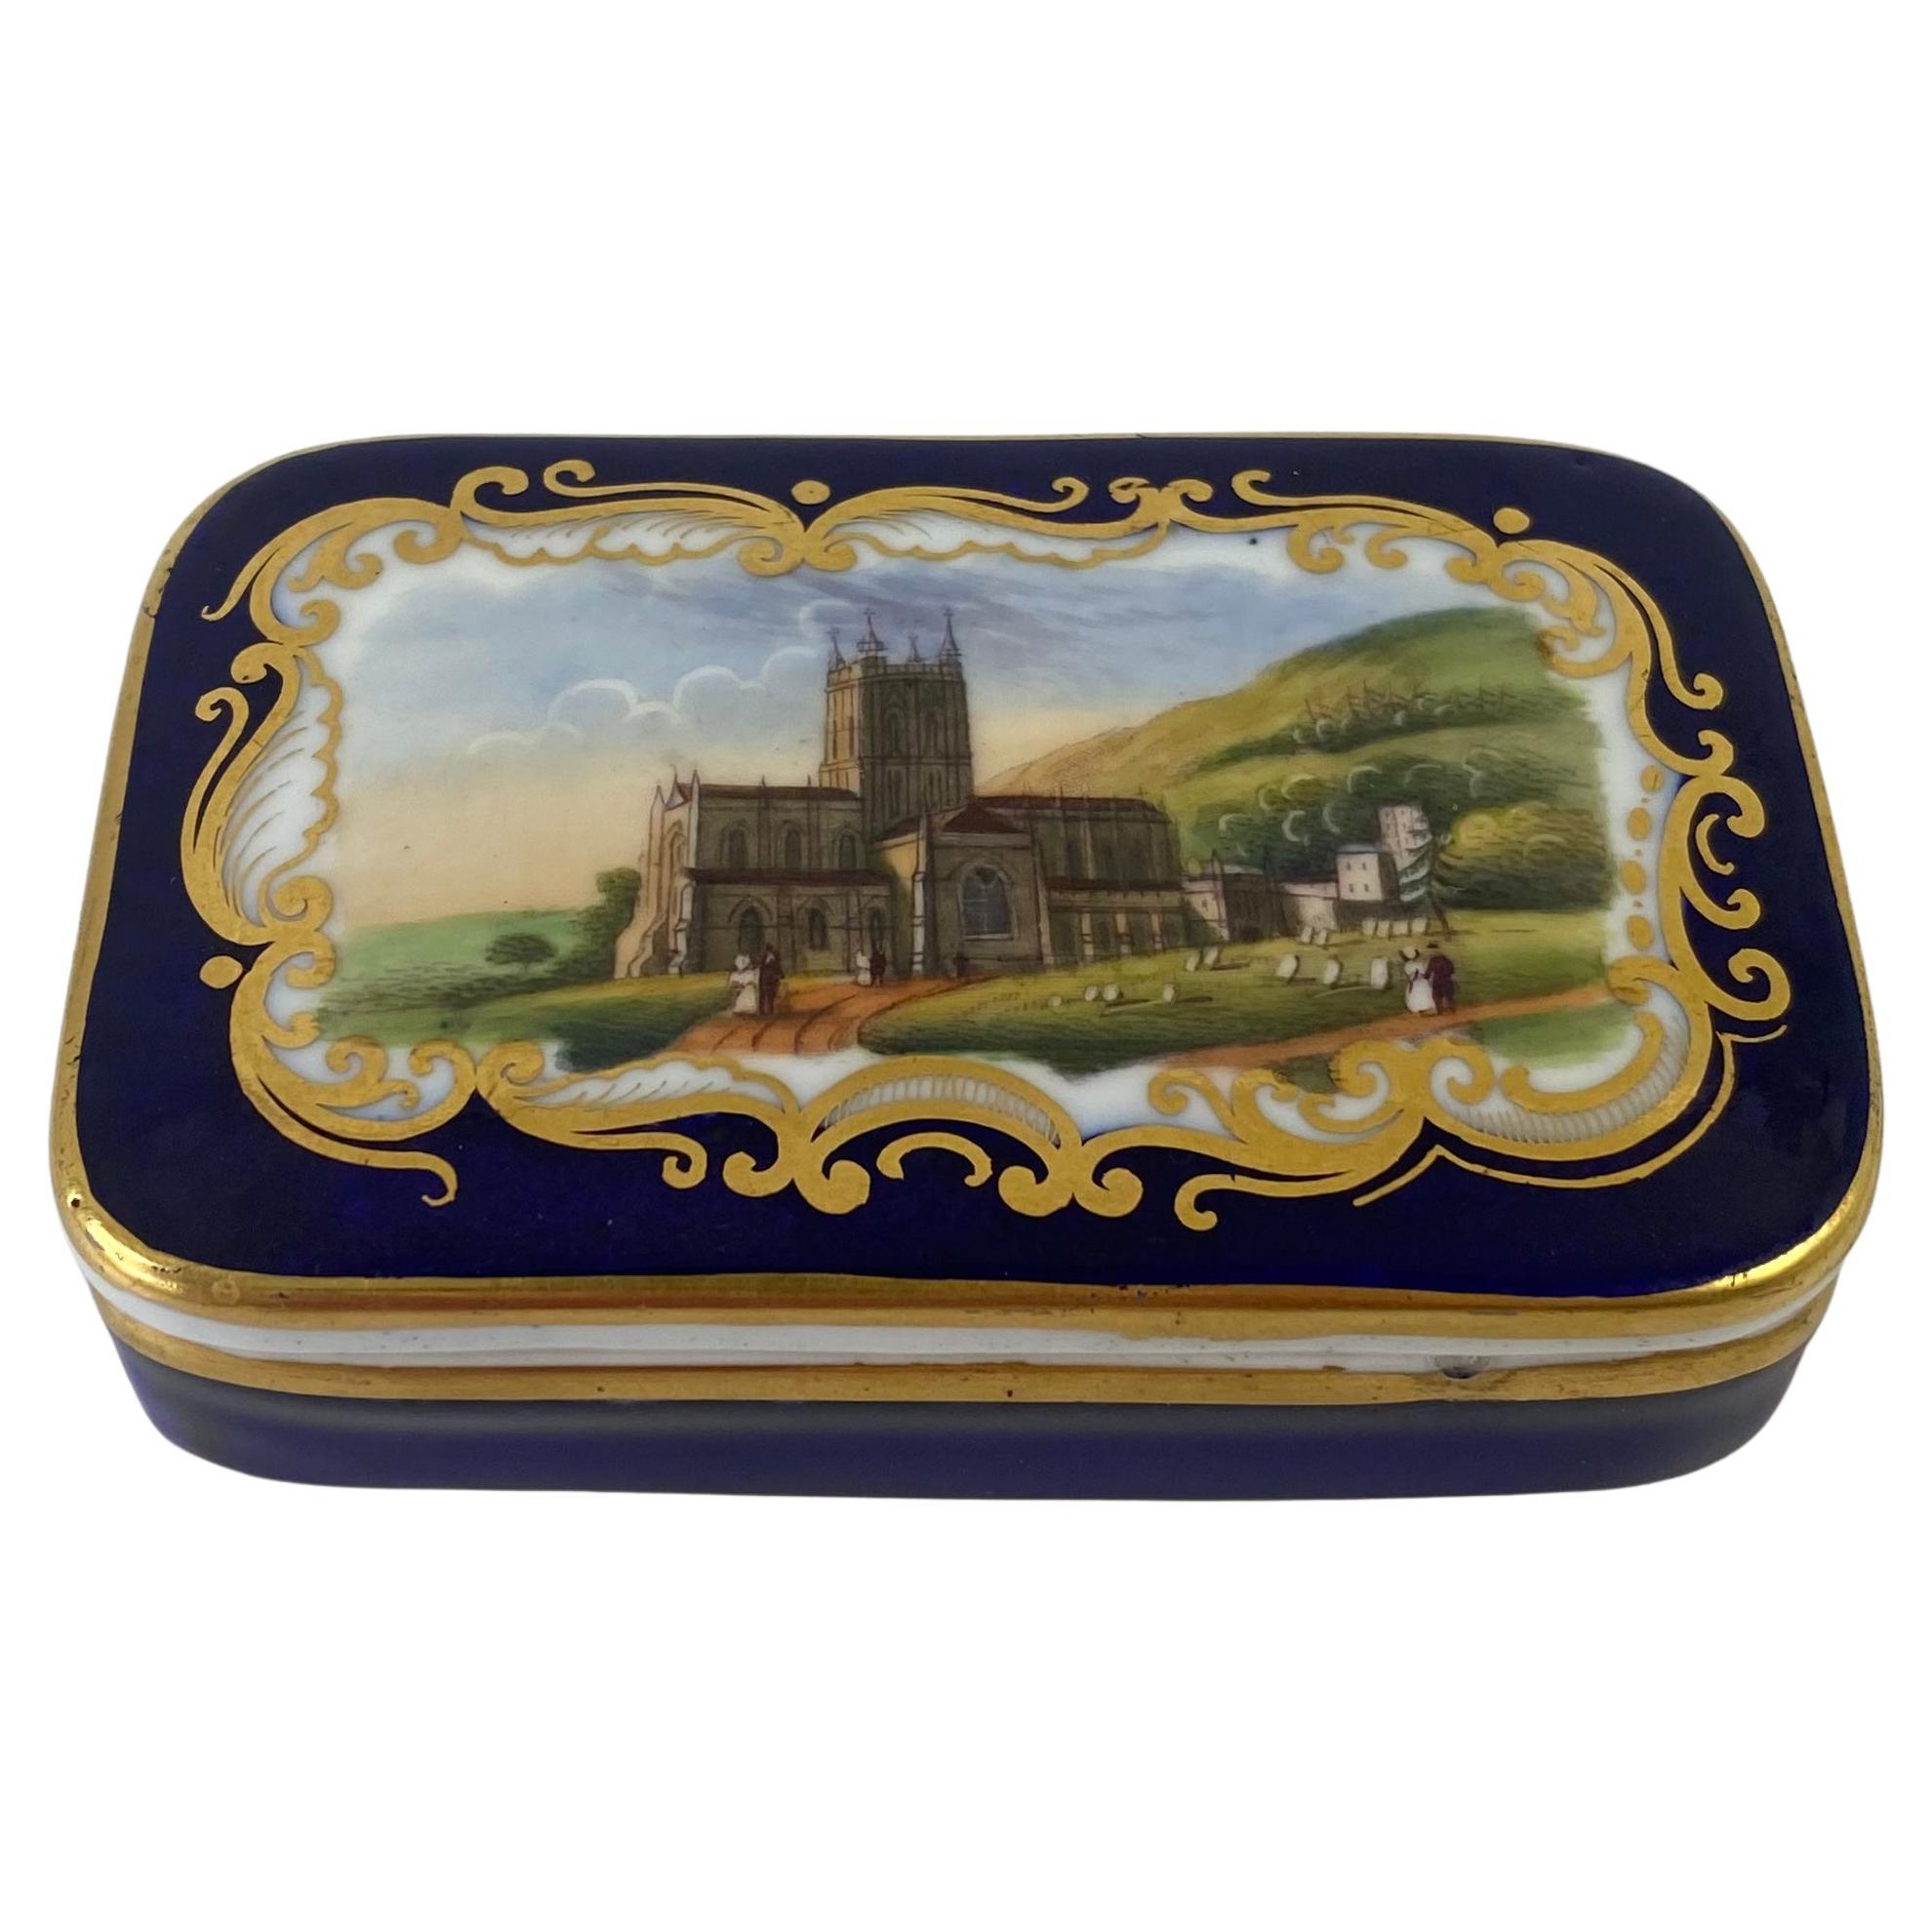 Chamberlain Worcester Porcelain Box and Cover, ‘Malvern’, c. 1840 For Sale